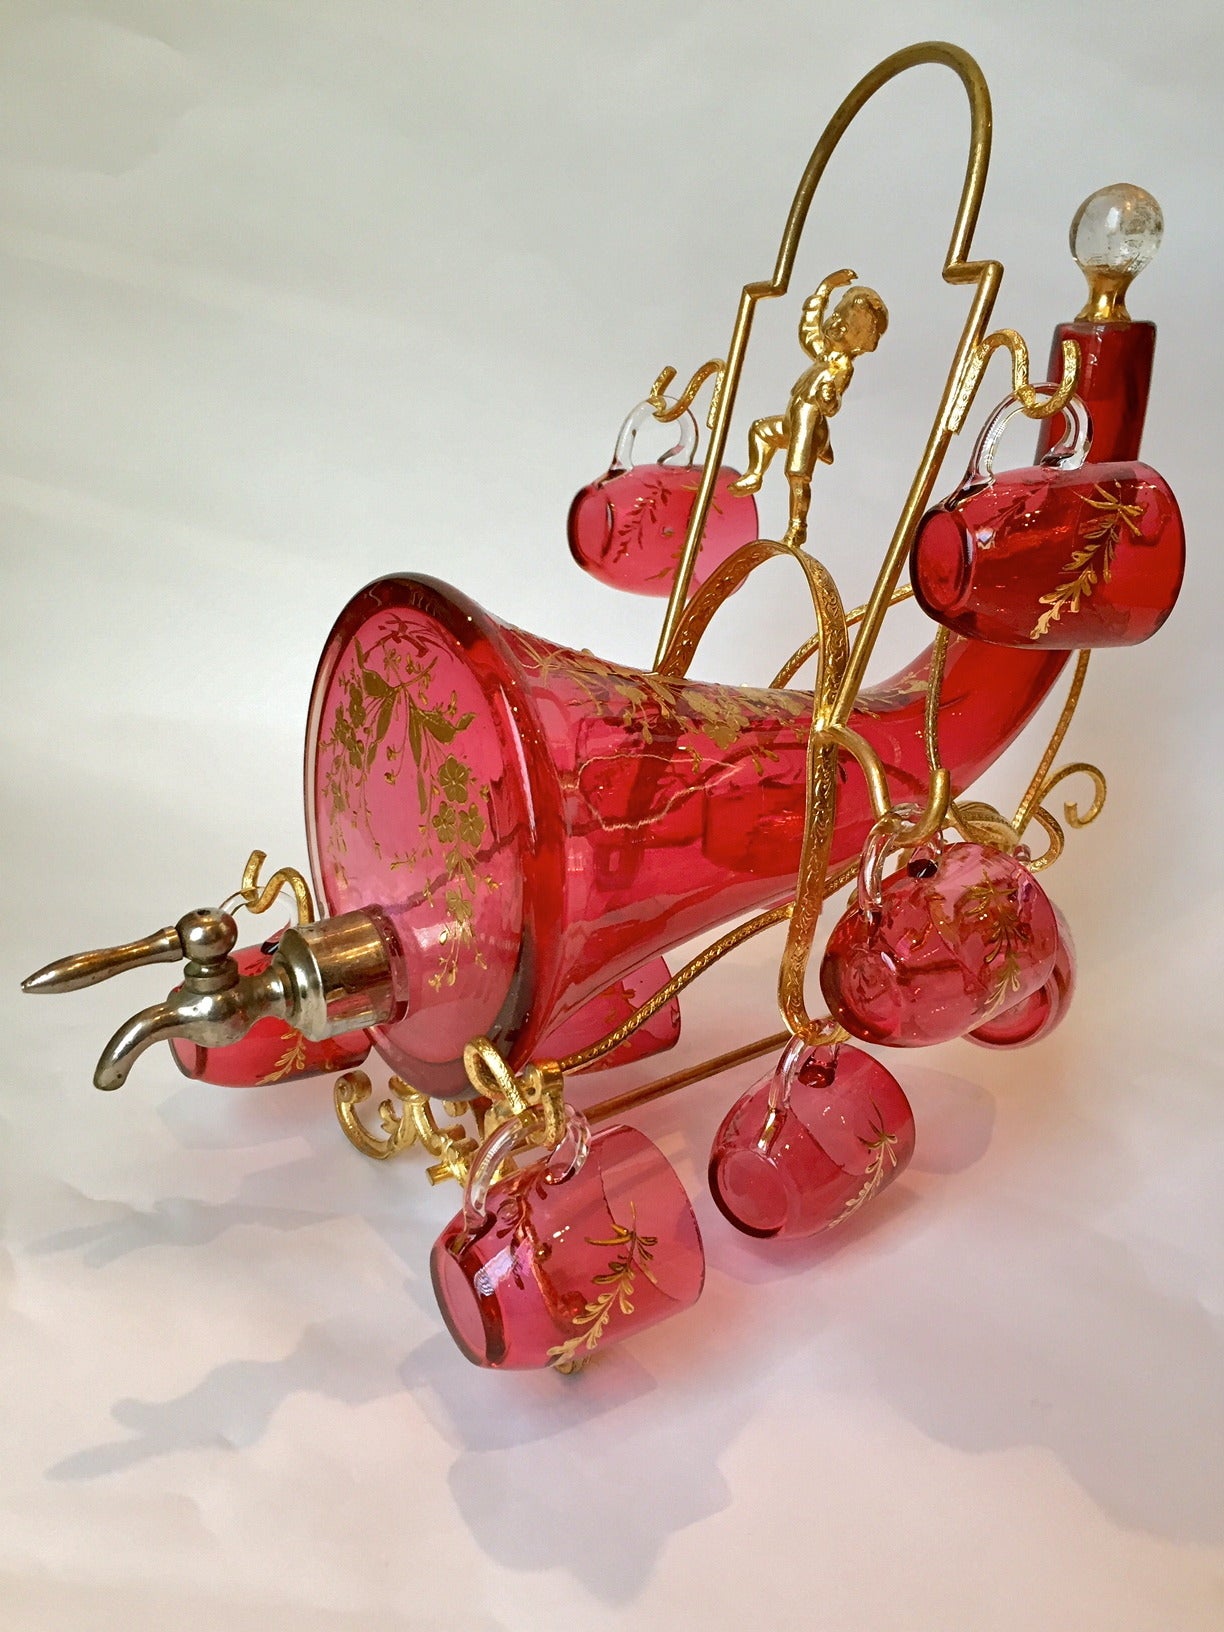 This is an exceptional example, very rare and so much to own and use. The unusual form and such a beautiful color of cranberry with gilt highlights.